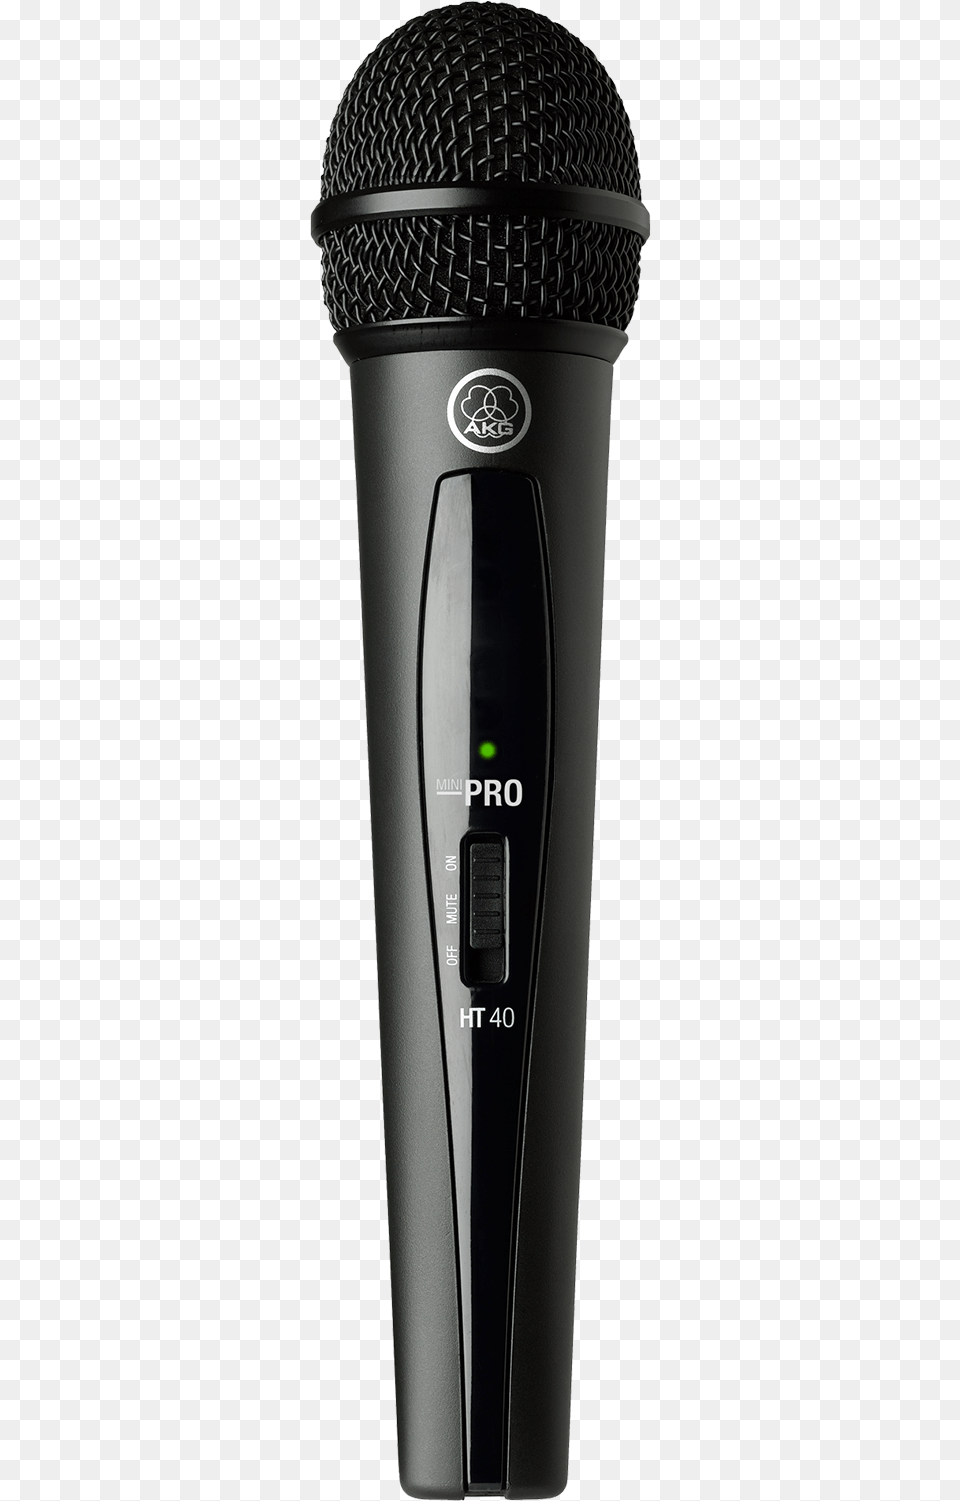 Akg Wms40 Wireless Microphone, Electrical Device Png Image